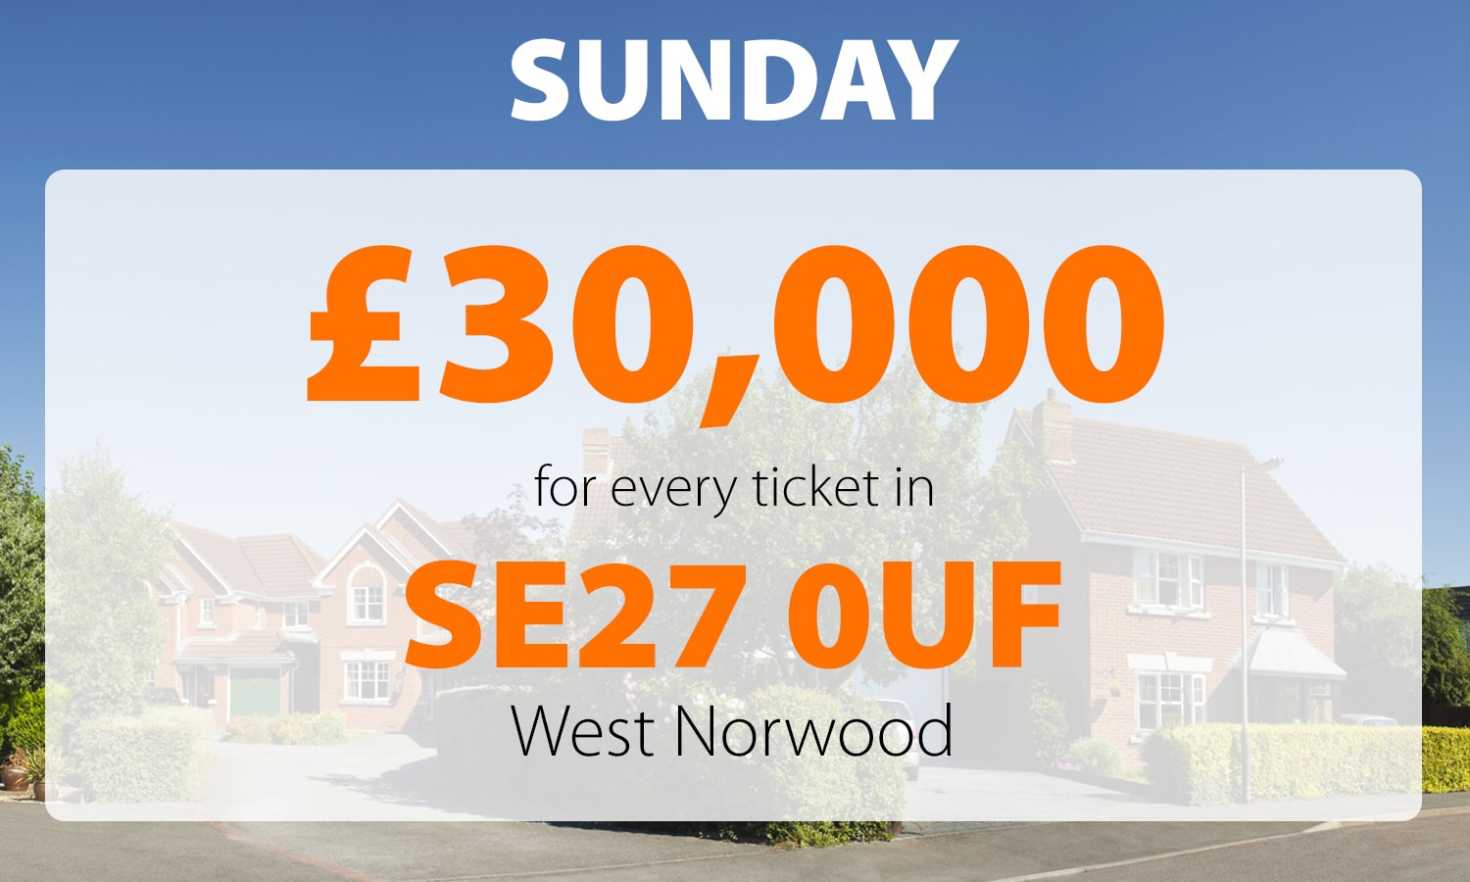 Two lucky winners from West Norwood are celebrating winning £30,000 each